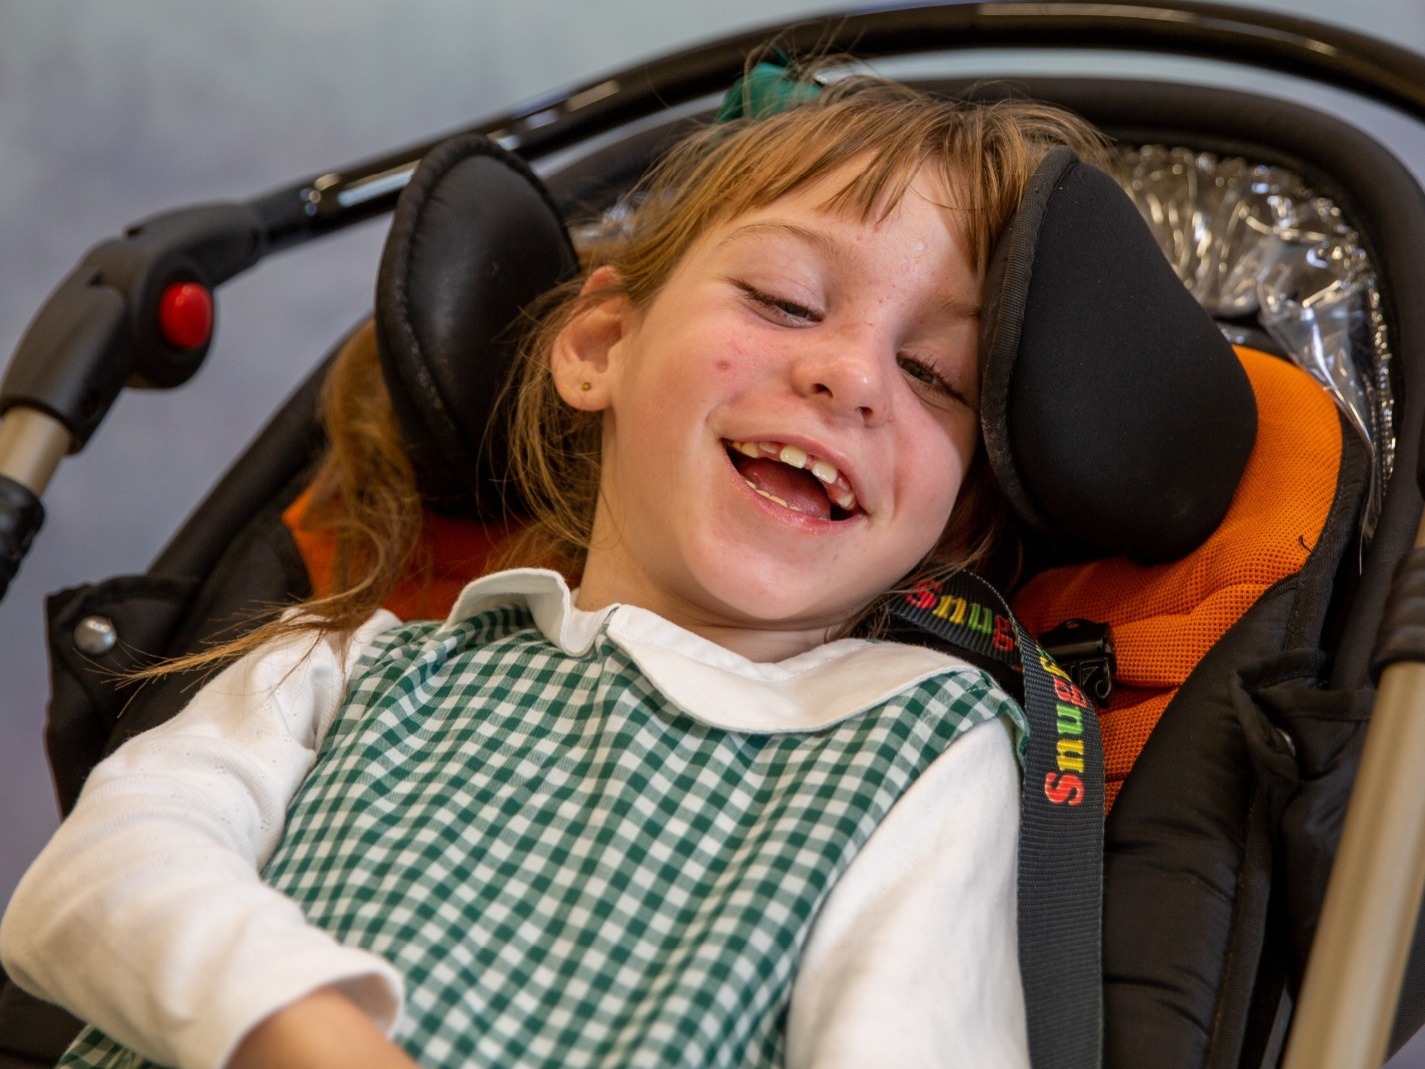 Stunning young disabled girl relaxed and smiling for her formal school photo session